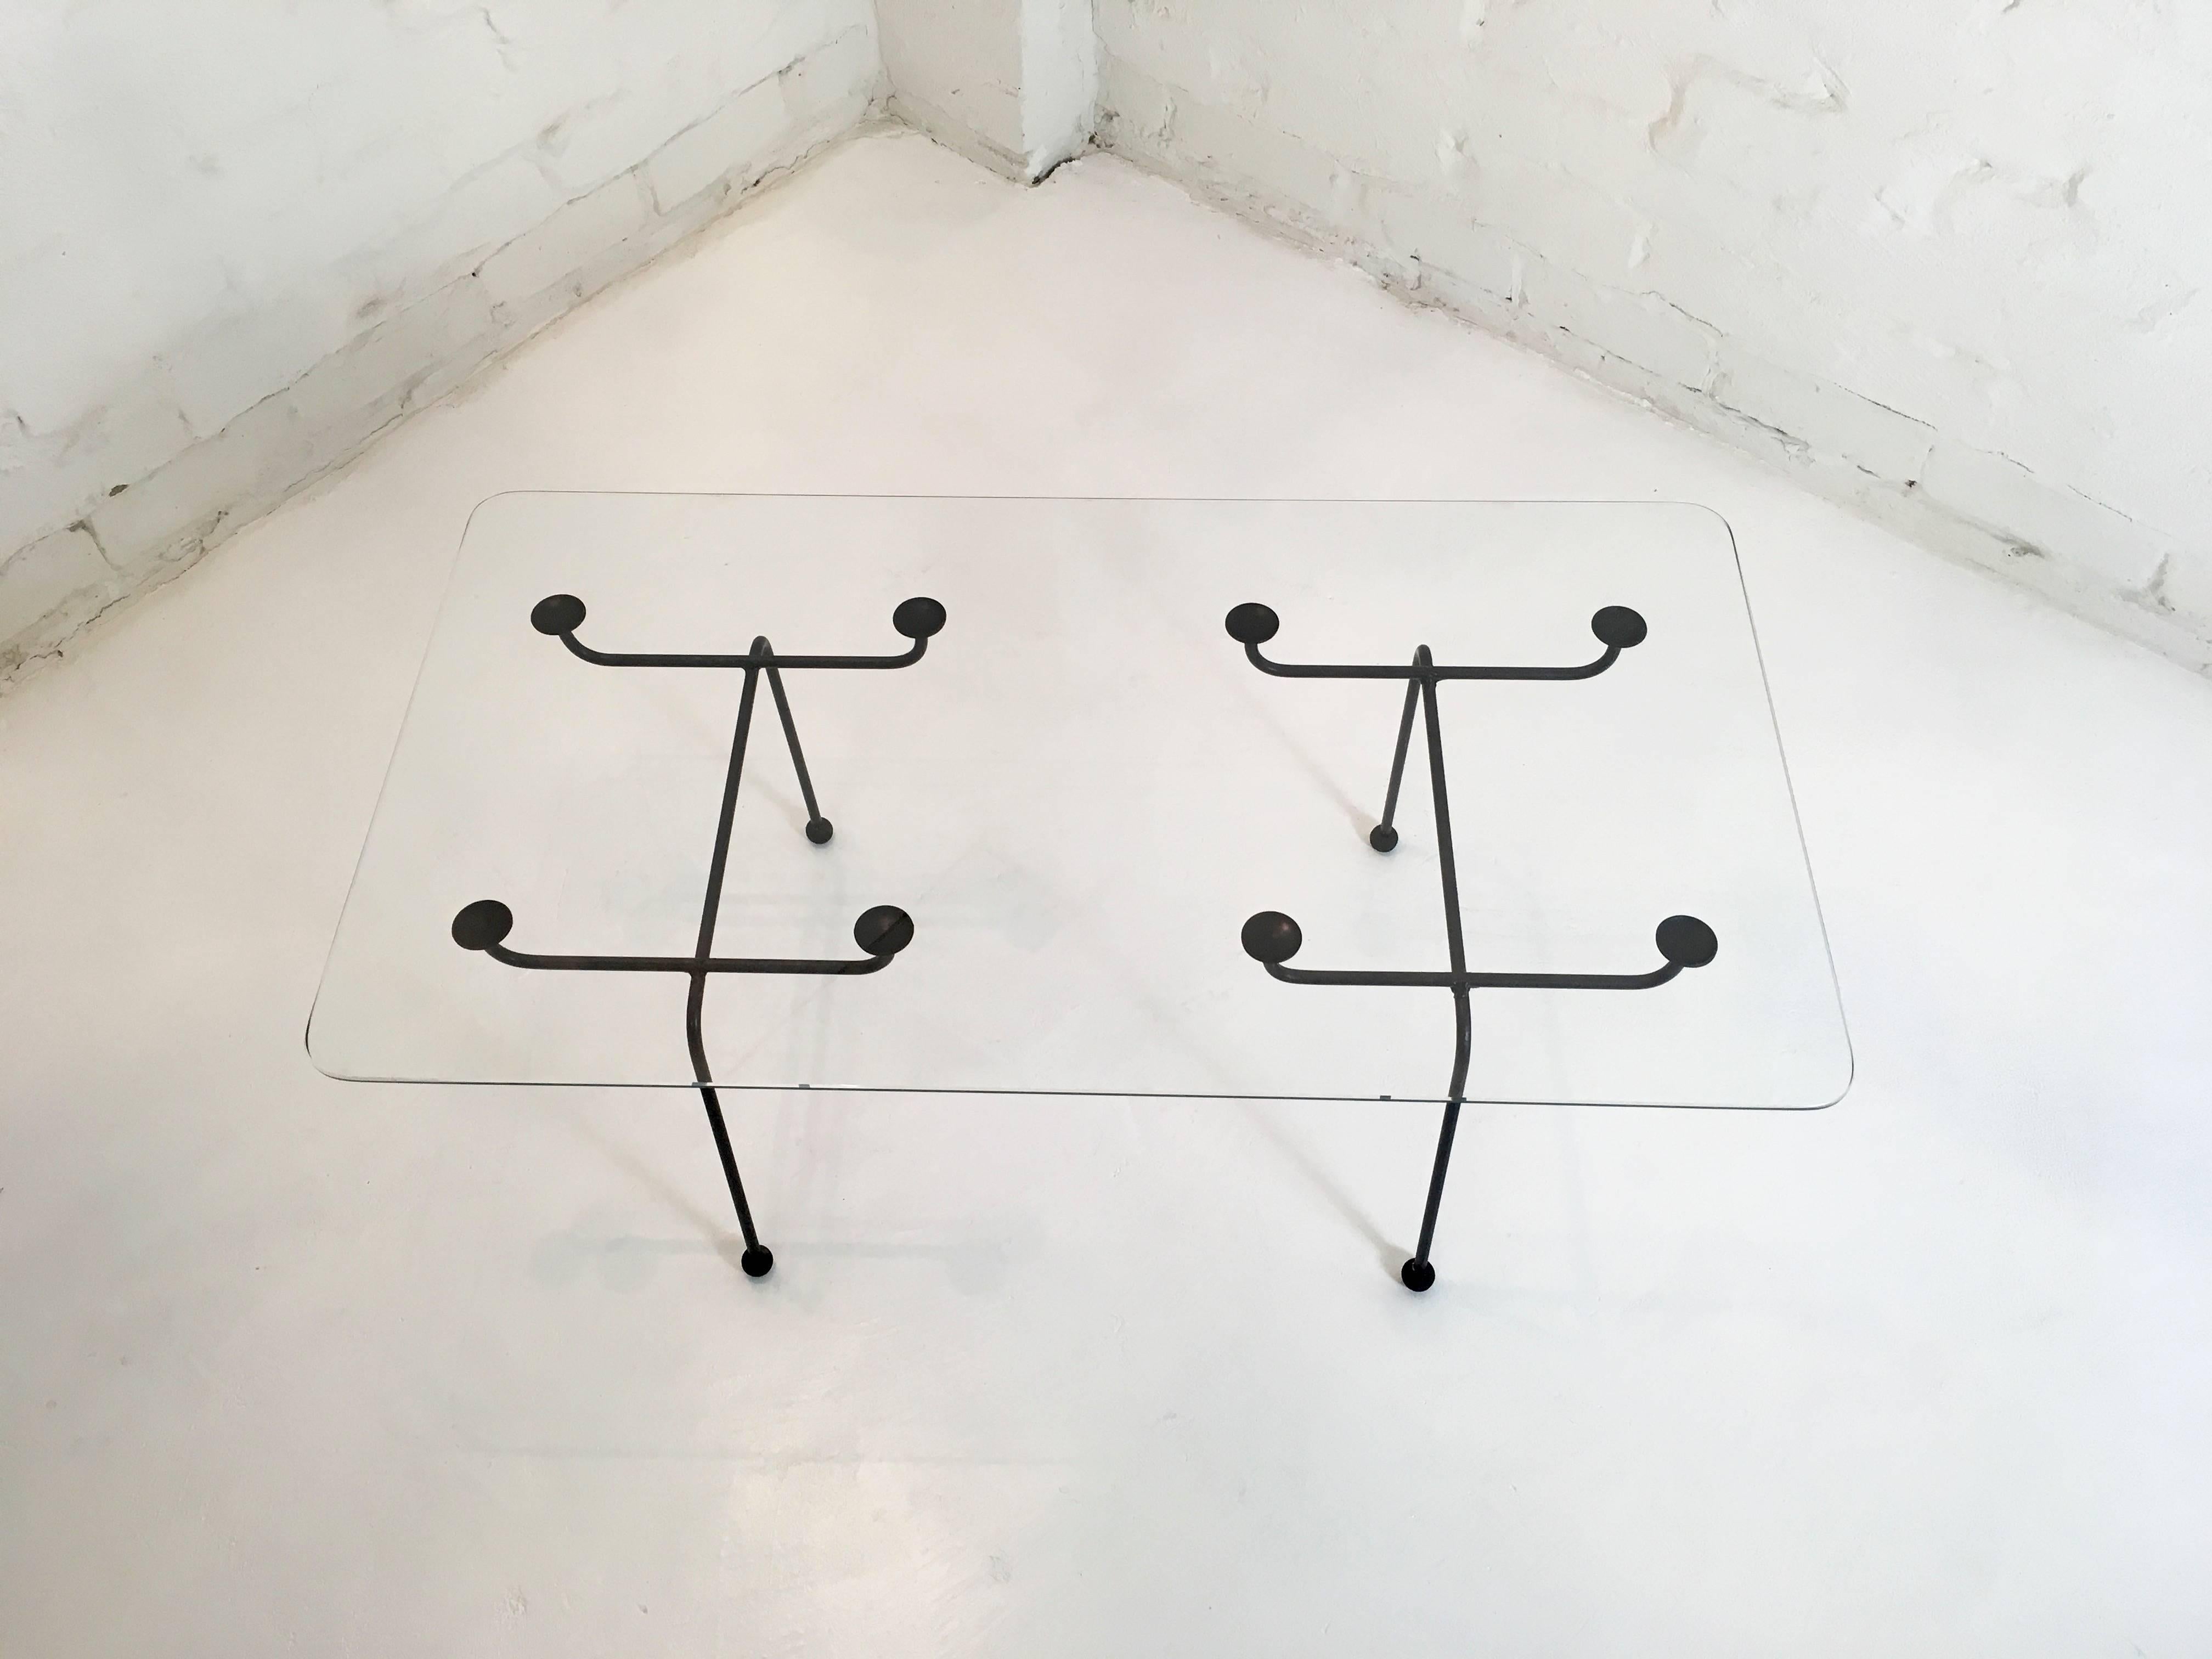 This exceptionally rare early Meadmore table has a light and playful presence. It reflects Meadmore's uncanny understanding of space and geometry which was to emerge more robustly in his stellar career as a sculptor.

His official website tells us